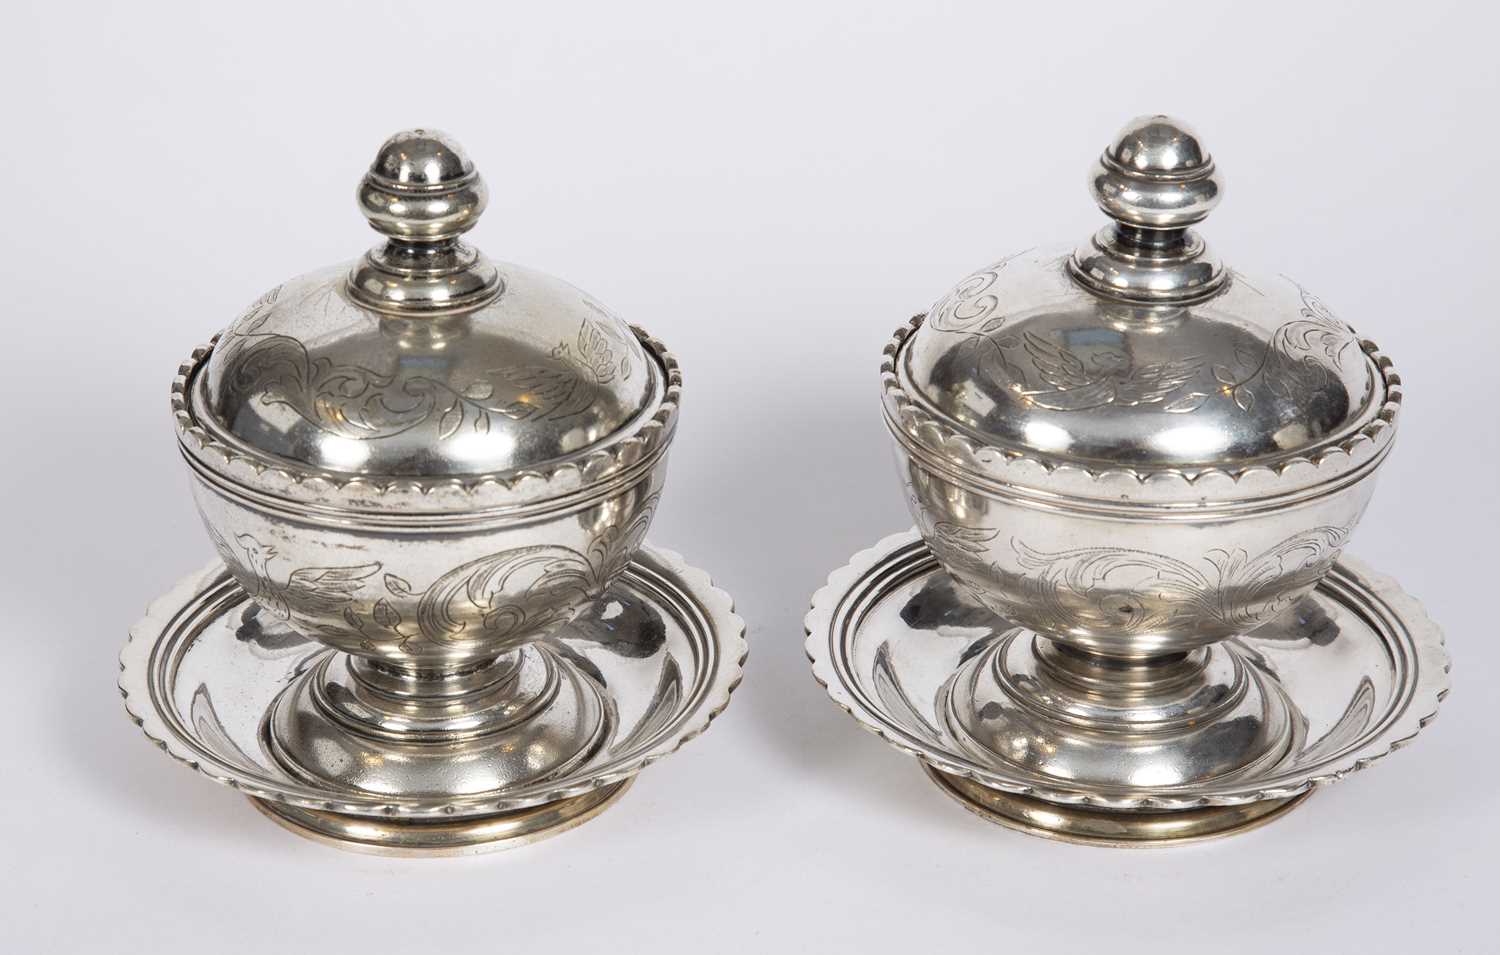 A pair of late 18th / early 19th Century Islamic silvered sweetmeat dishes, lidded cover and bowls - Image 2 of 2